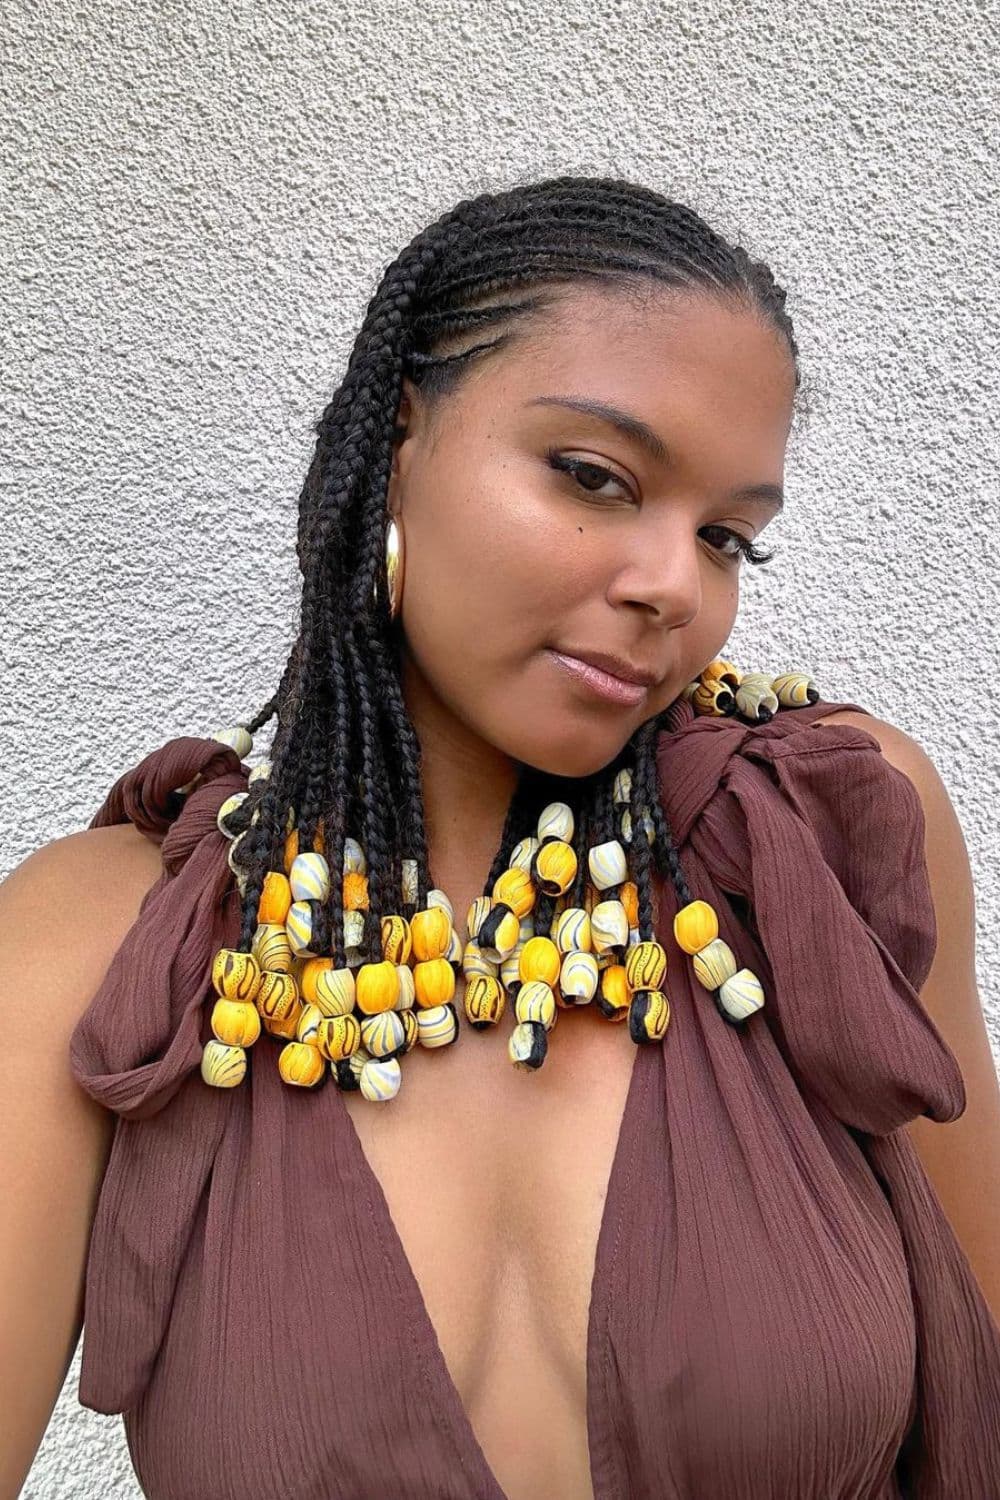 A woman with cornrows with wooden beads.